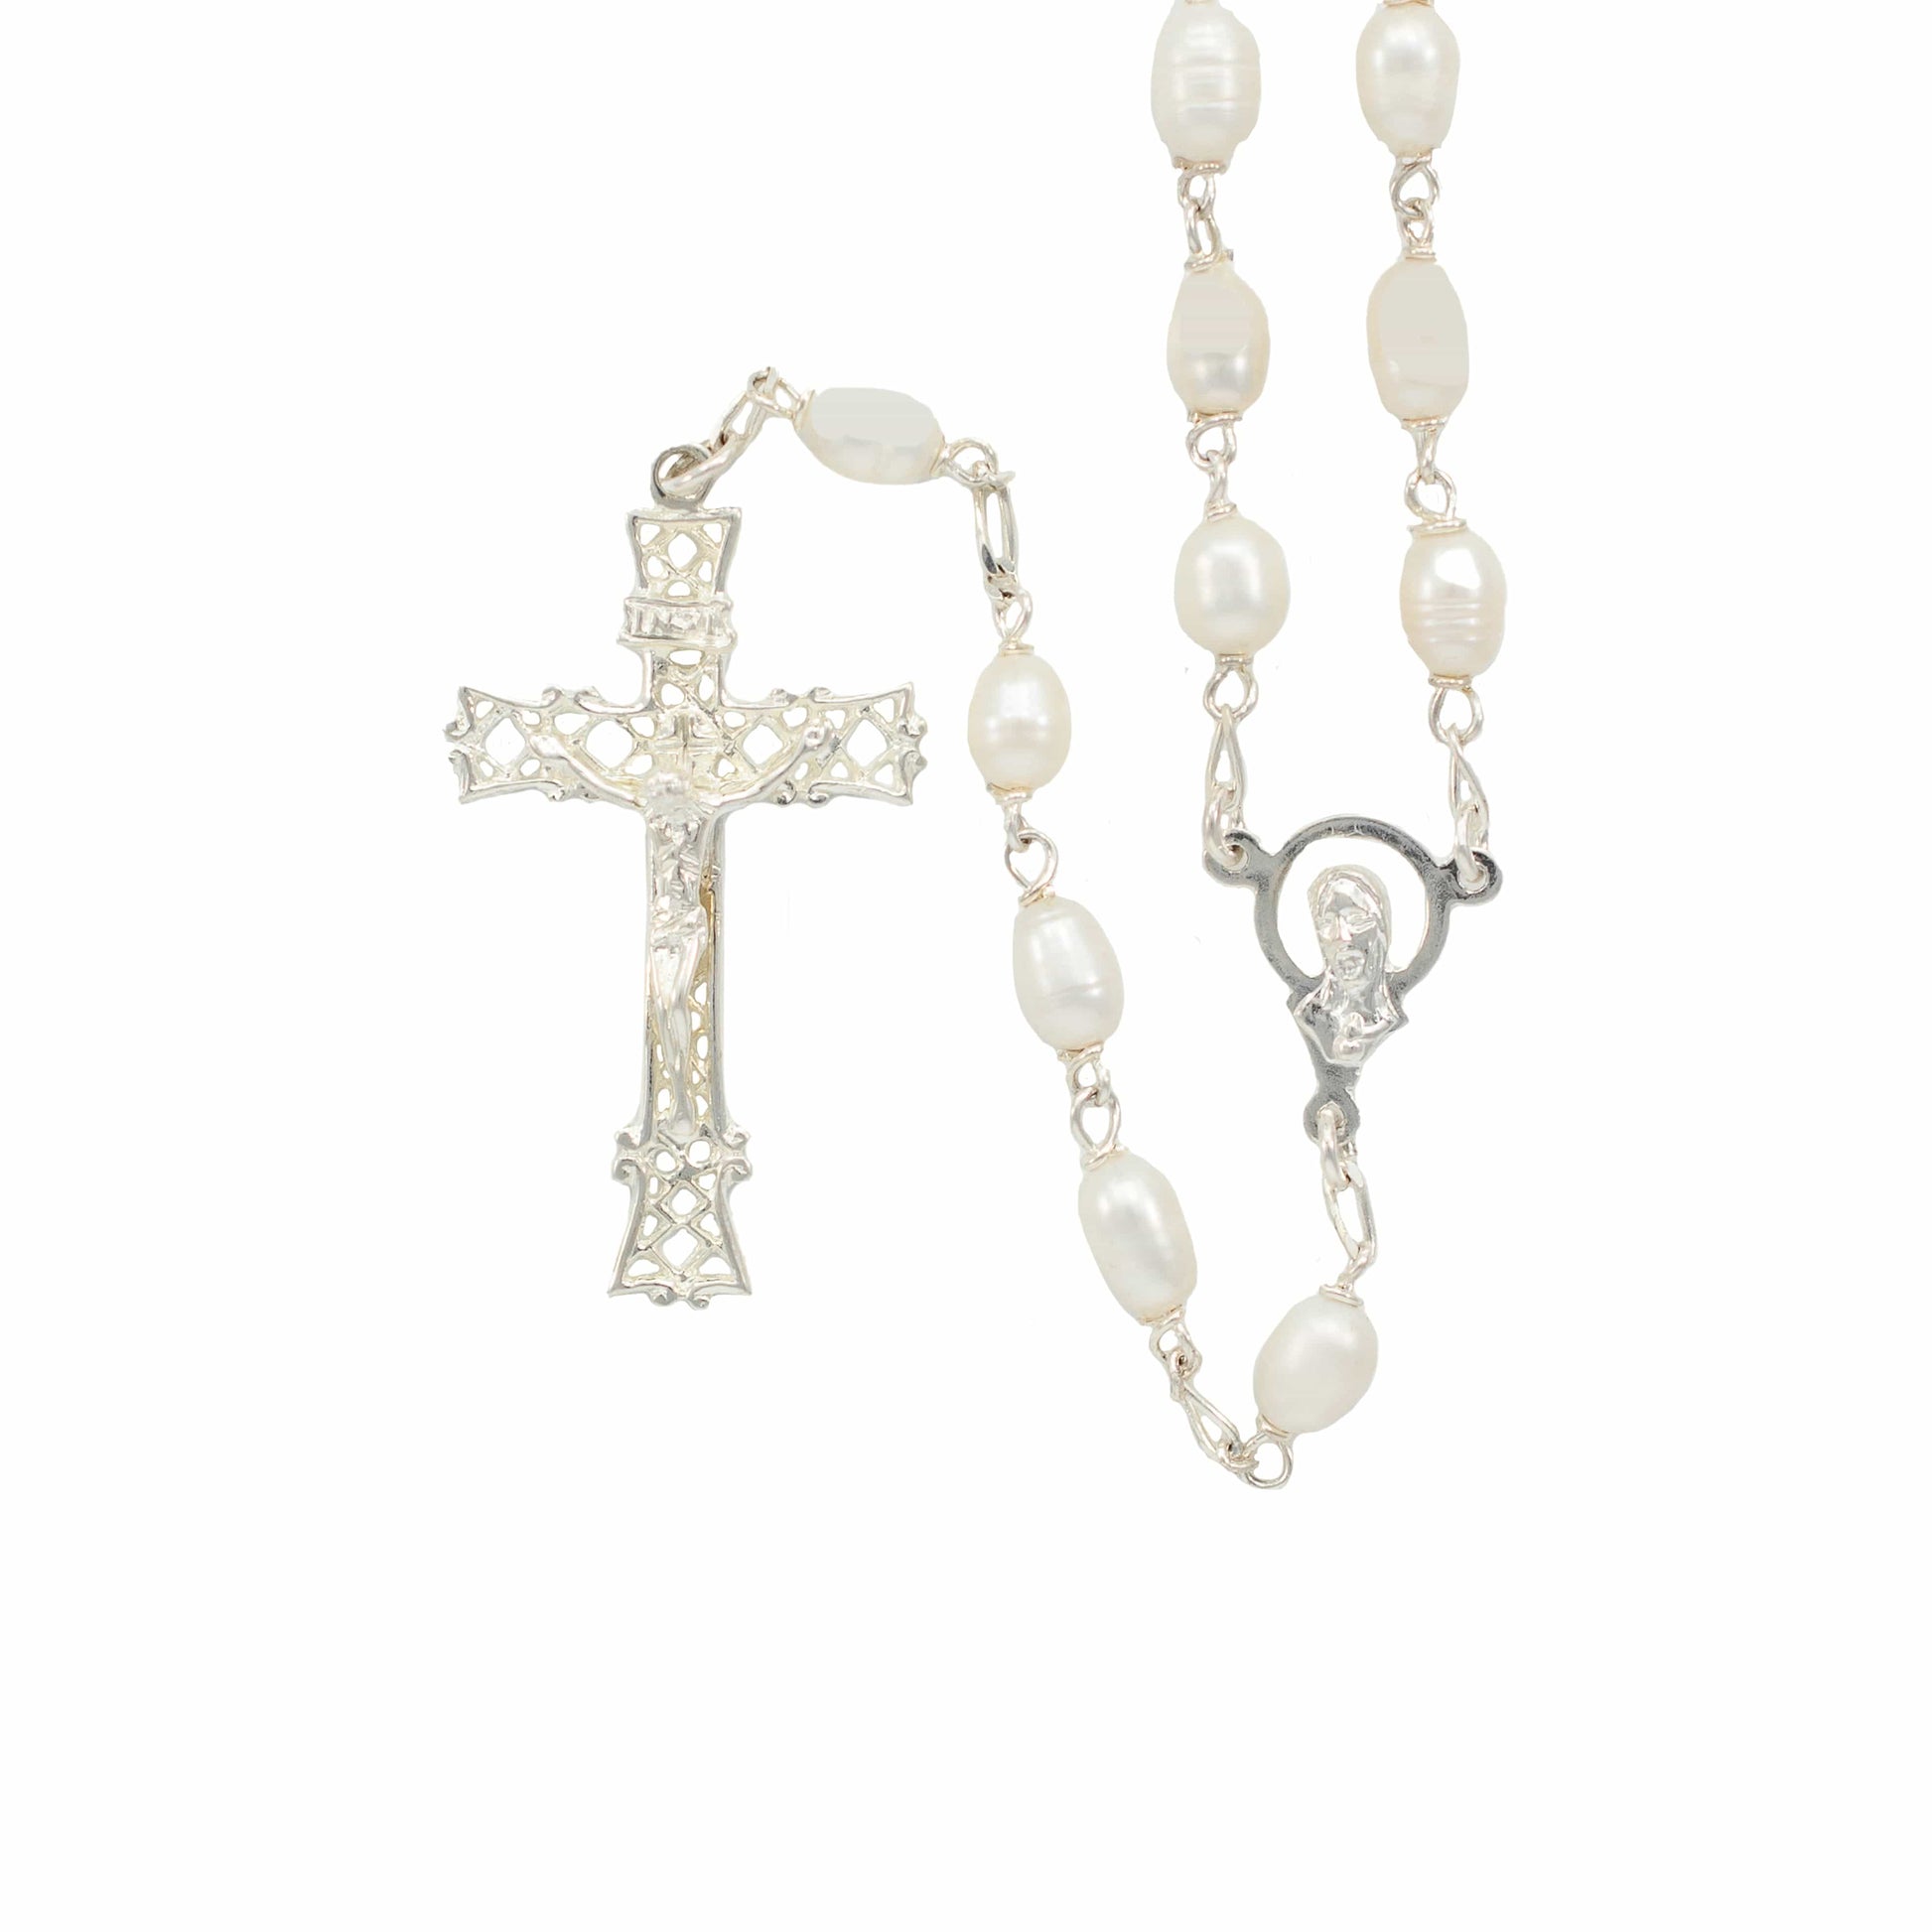 MONDO CATTOLICO Prayer Beads Sterling Silver Rosary Freshwater White Pearls